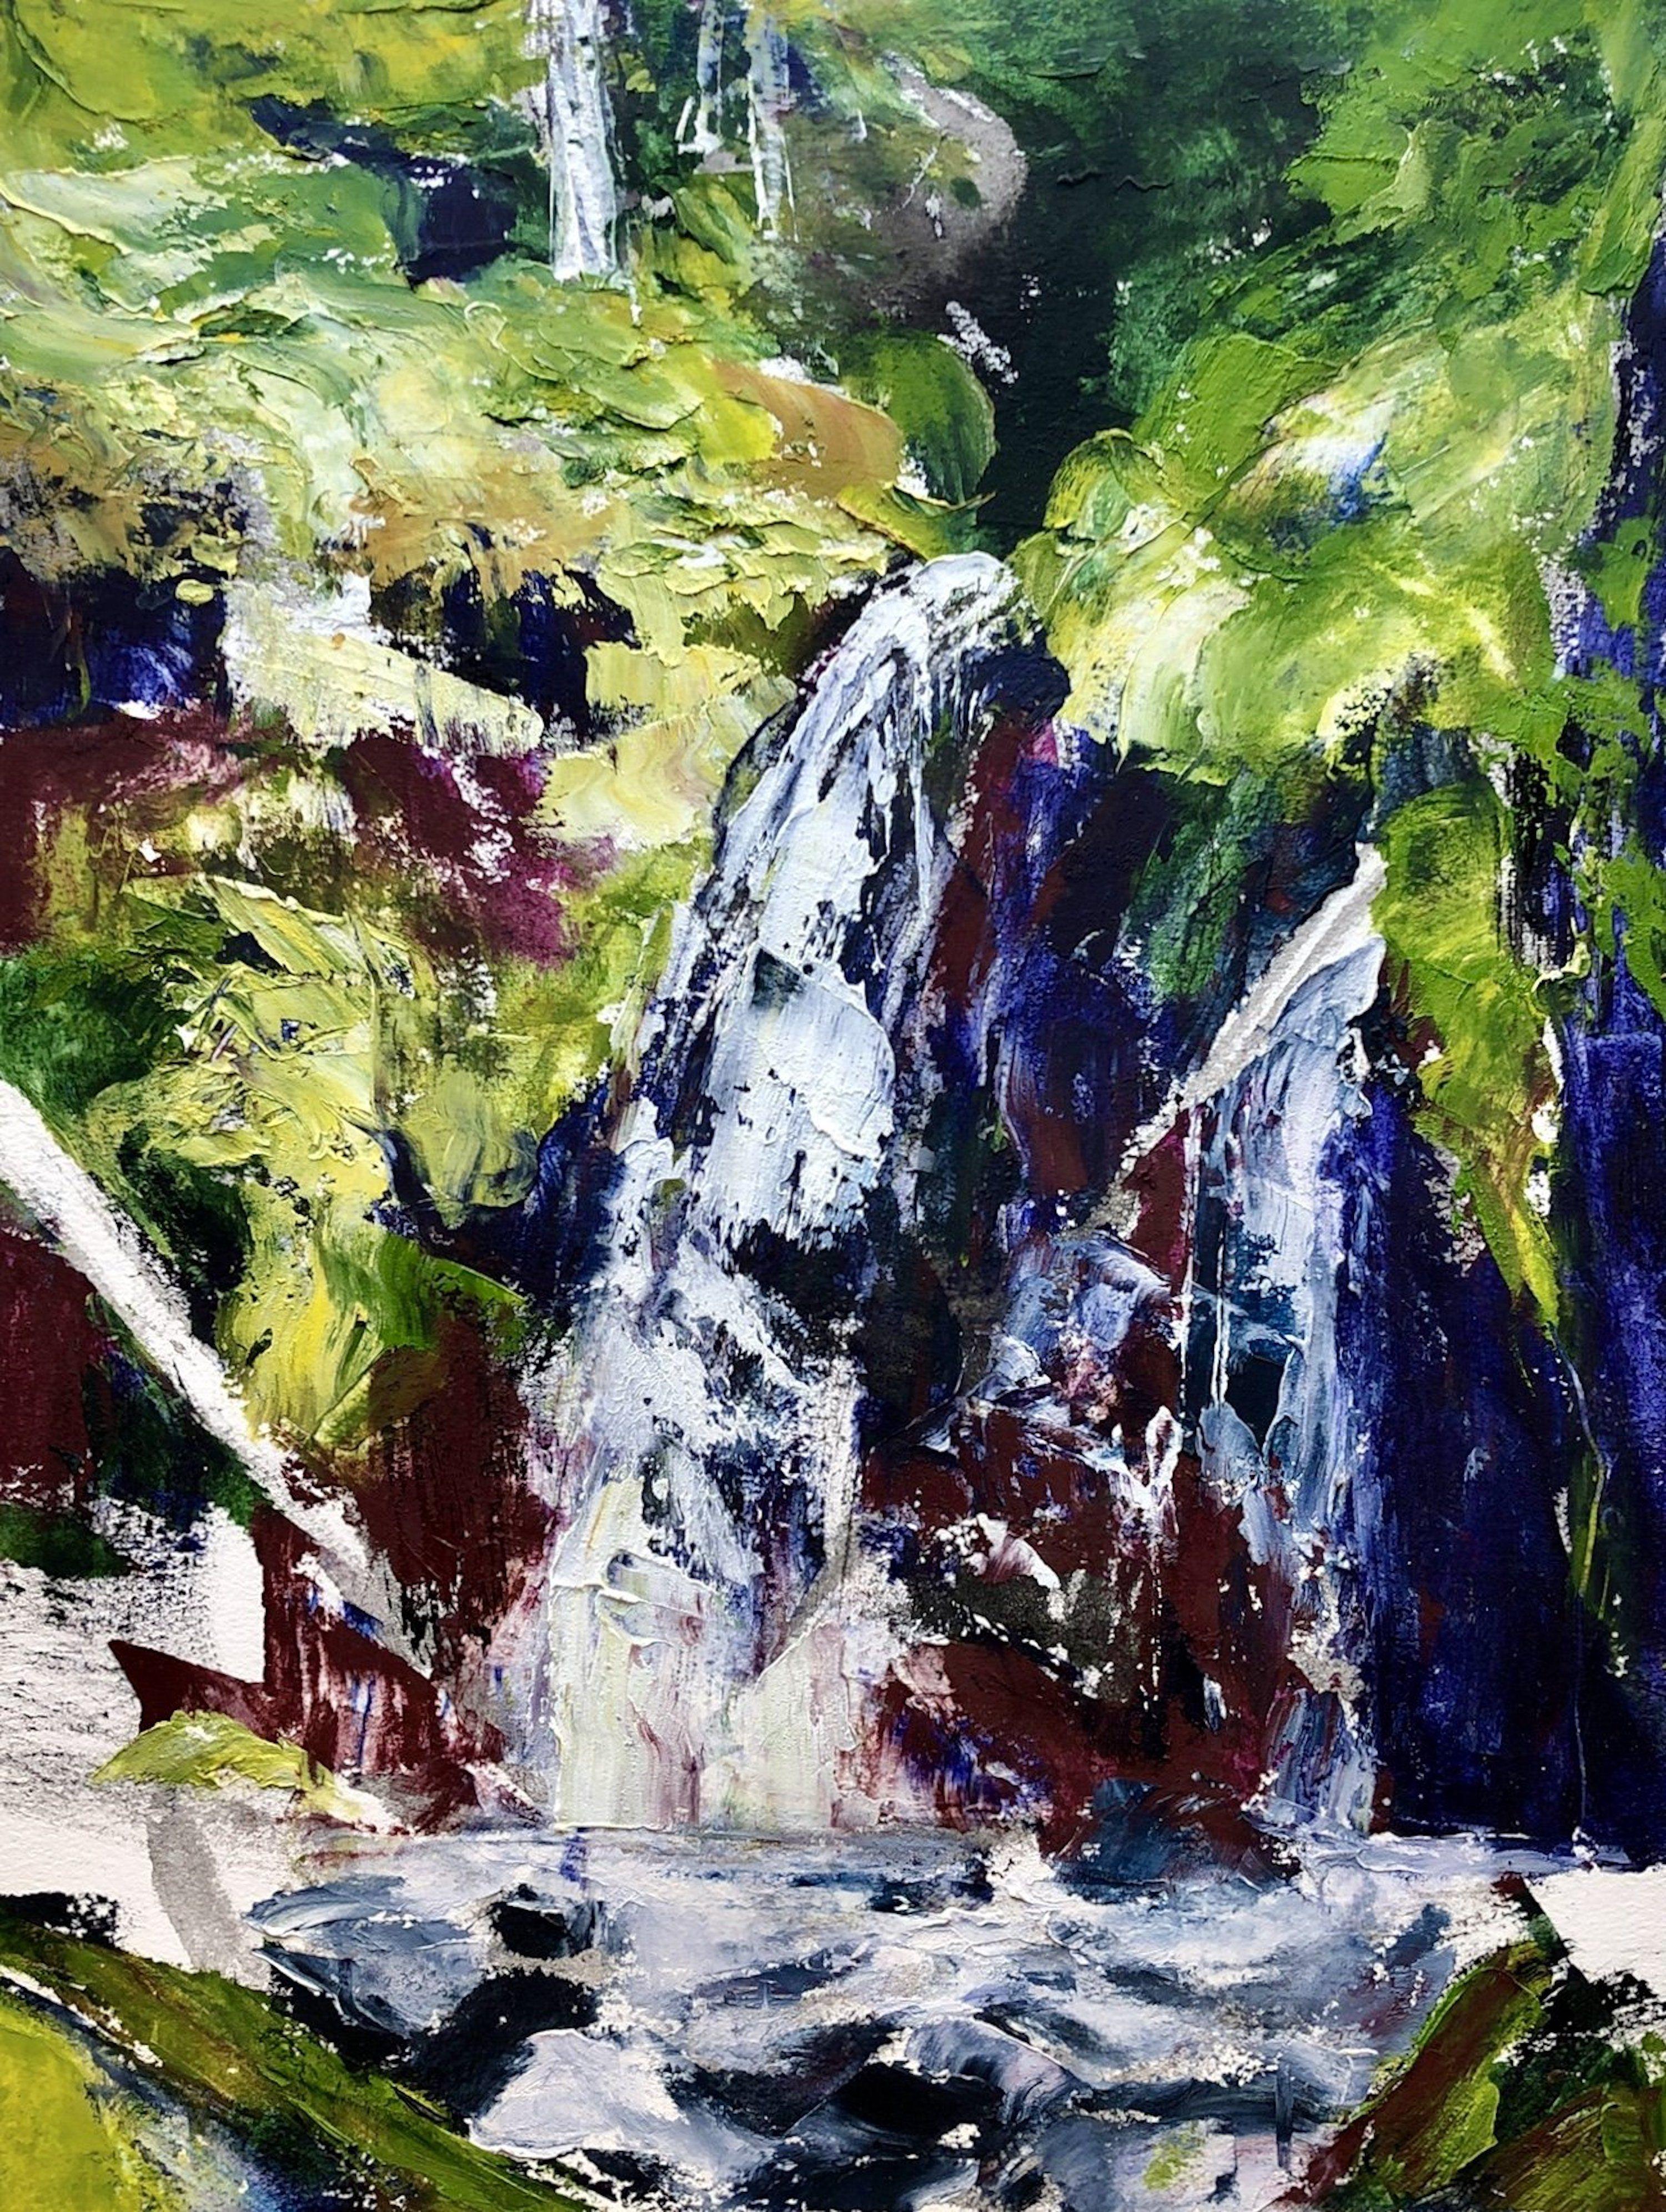 Oil, ink and cold wax painting on paper created with a palette knife on Arches oil paper. This painting captures a dynamic waterfall encountered on a forest walk.     :: Painting :: Expressionism :: This piece comes with an official certificate of